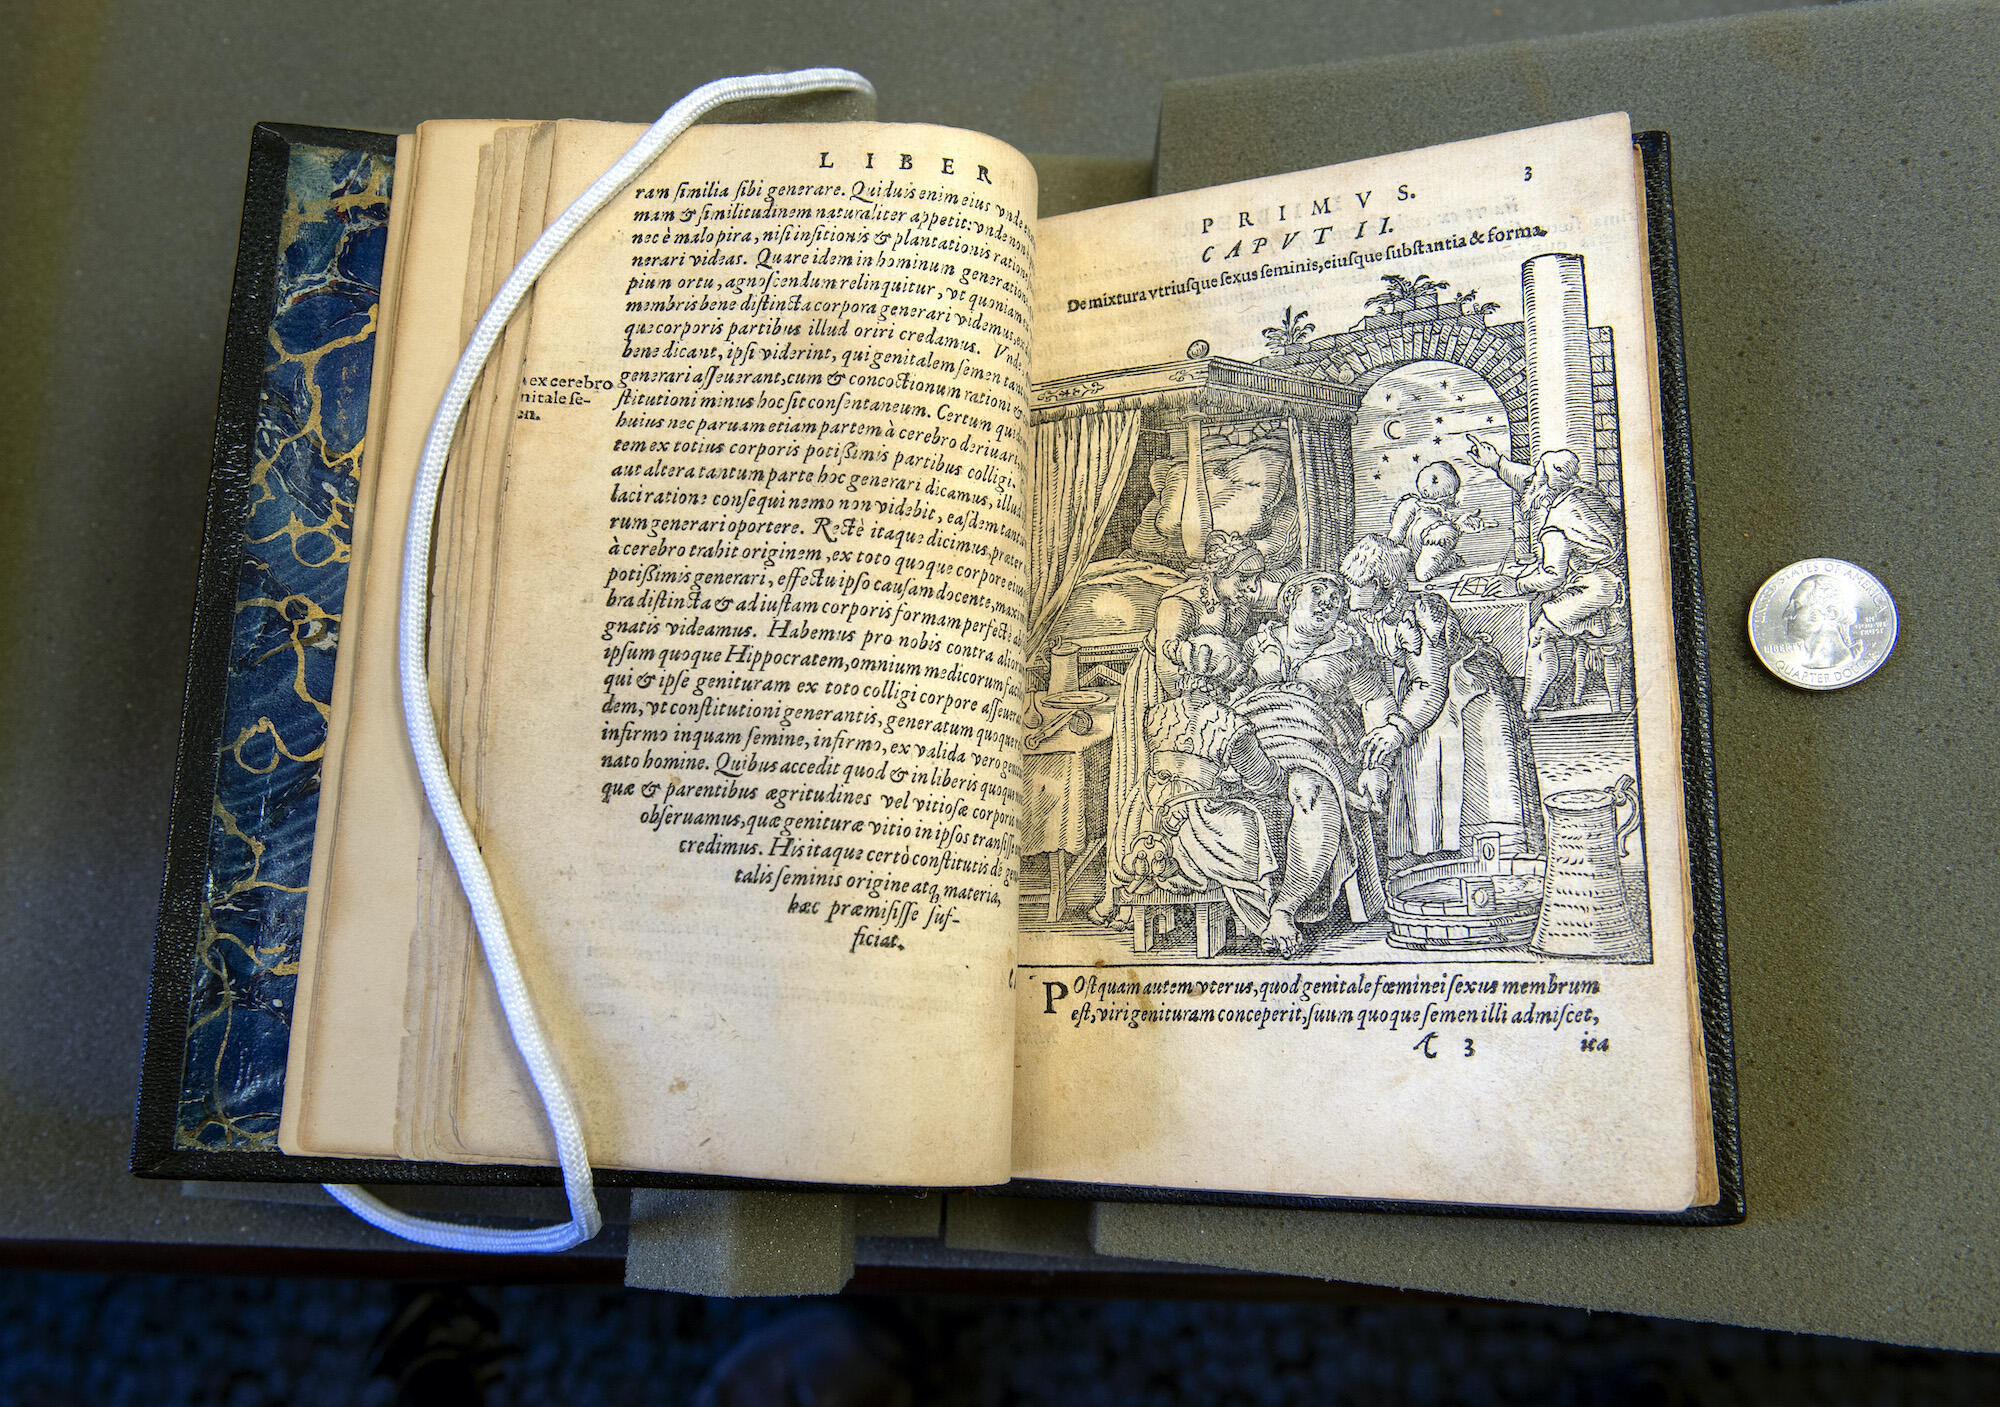 16th century medical illustration book, with image showing a birthing stool, a midwife's instruments hanging from her belt, and the scissors and twine on the table for cutting and tying the umbilical cord. The the background, two men are charting star positions to create a horoscope for the infant. 